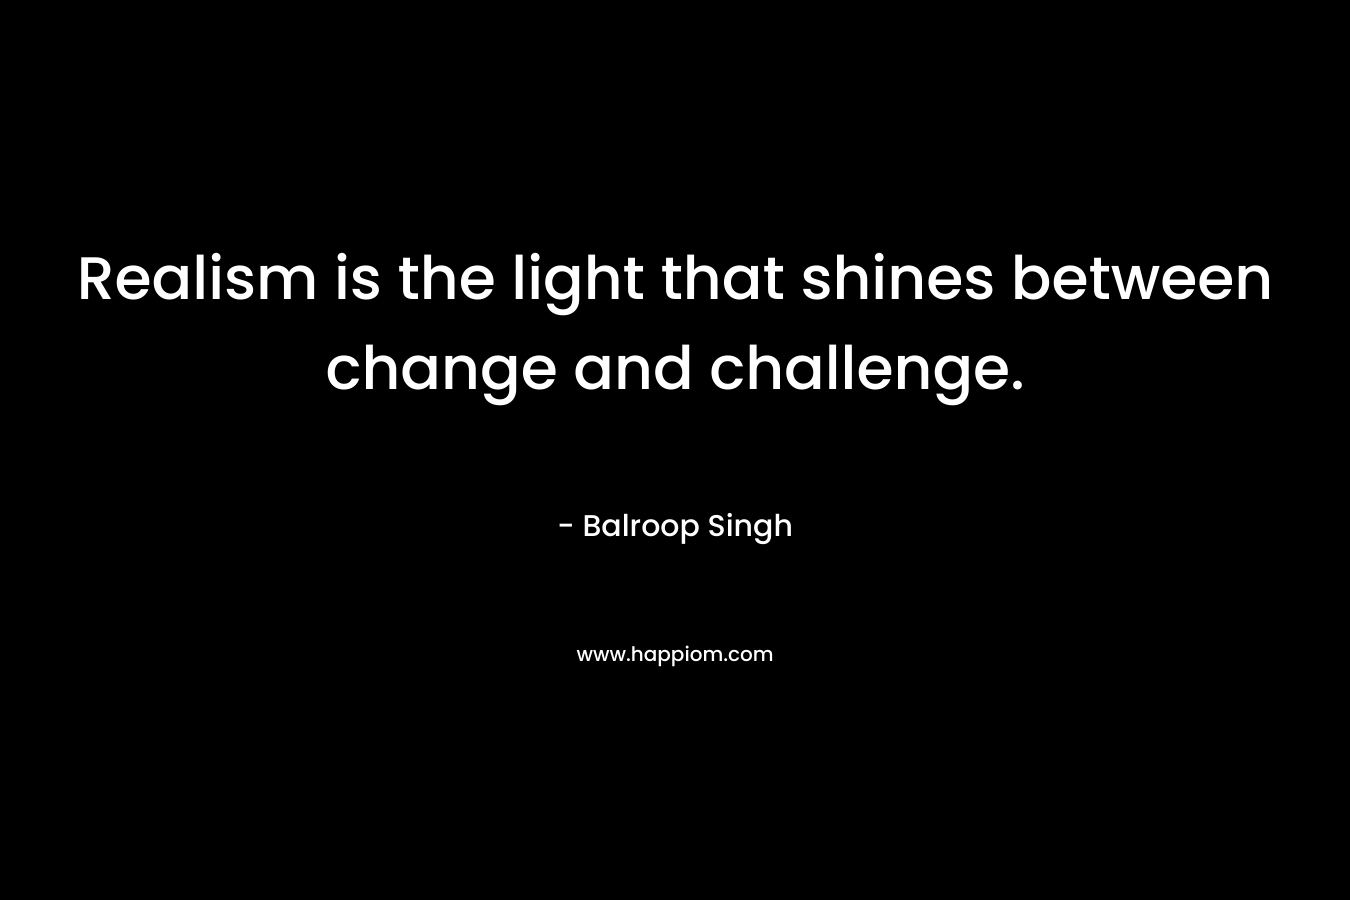 Realism is the light that shines between change and challenge. – Balroop Singh